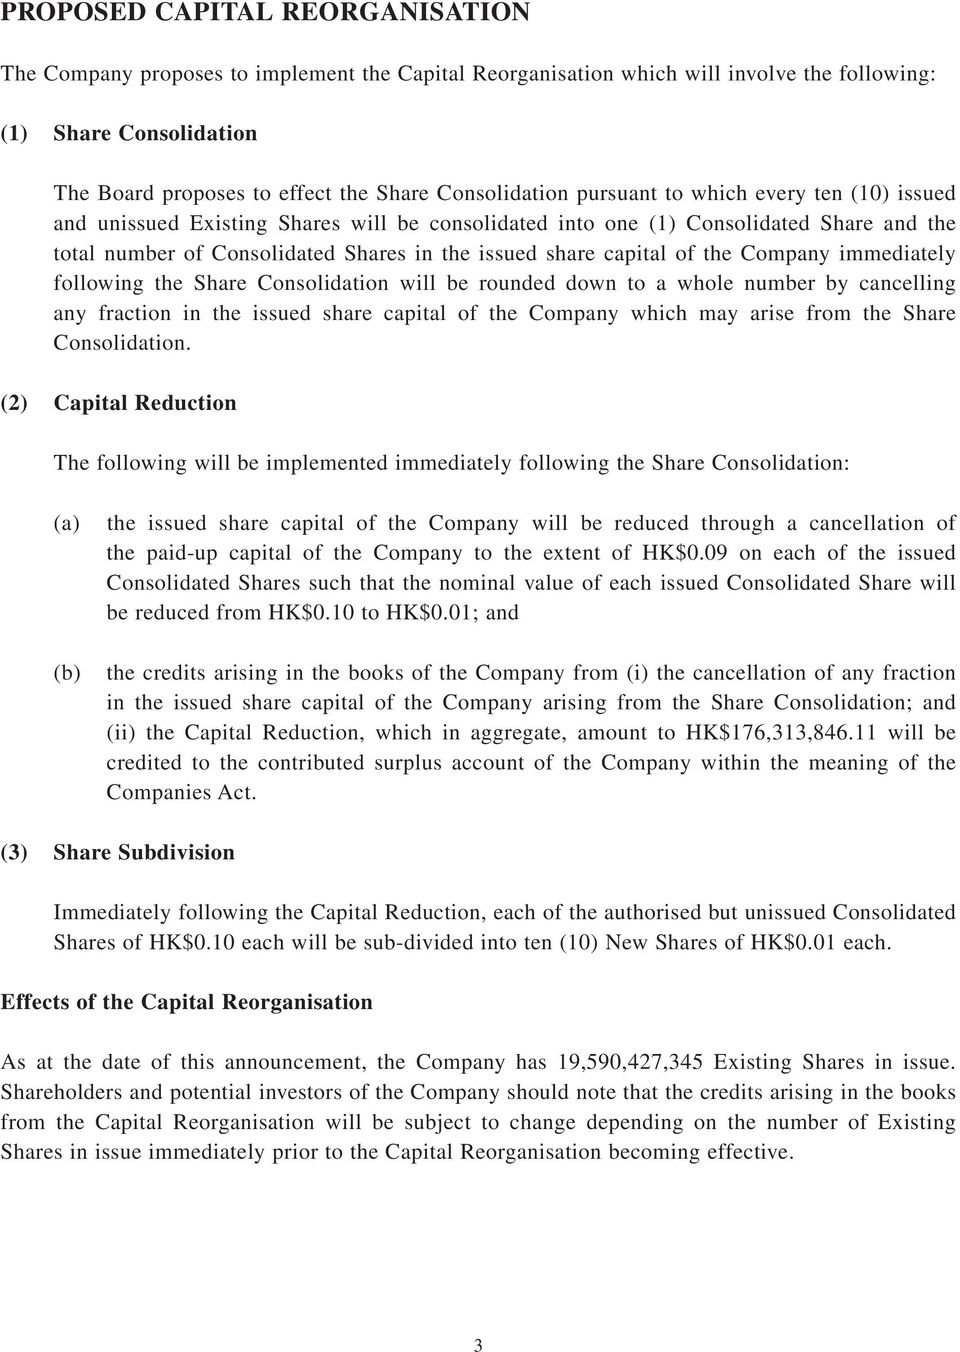 capital of the Company immediately following the Share Consolidation will be rounded down to a whole number by cancelling any fraction in the issued share capital of the Company which may arise from